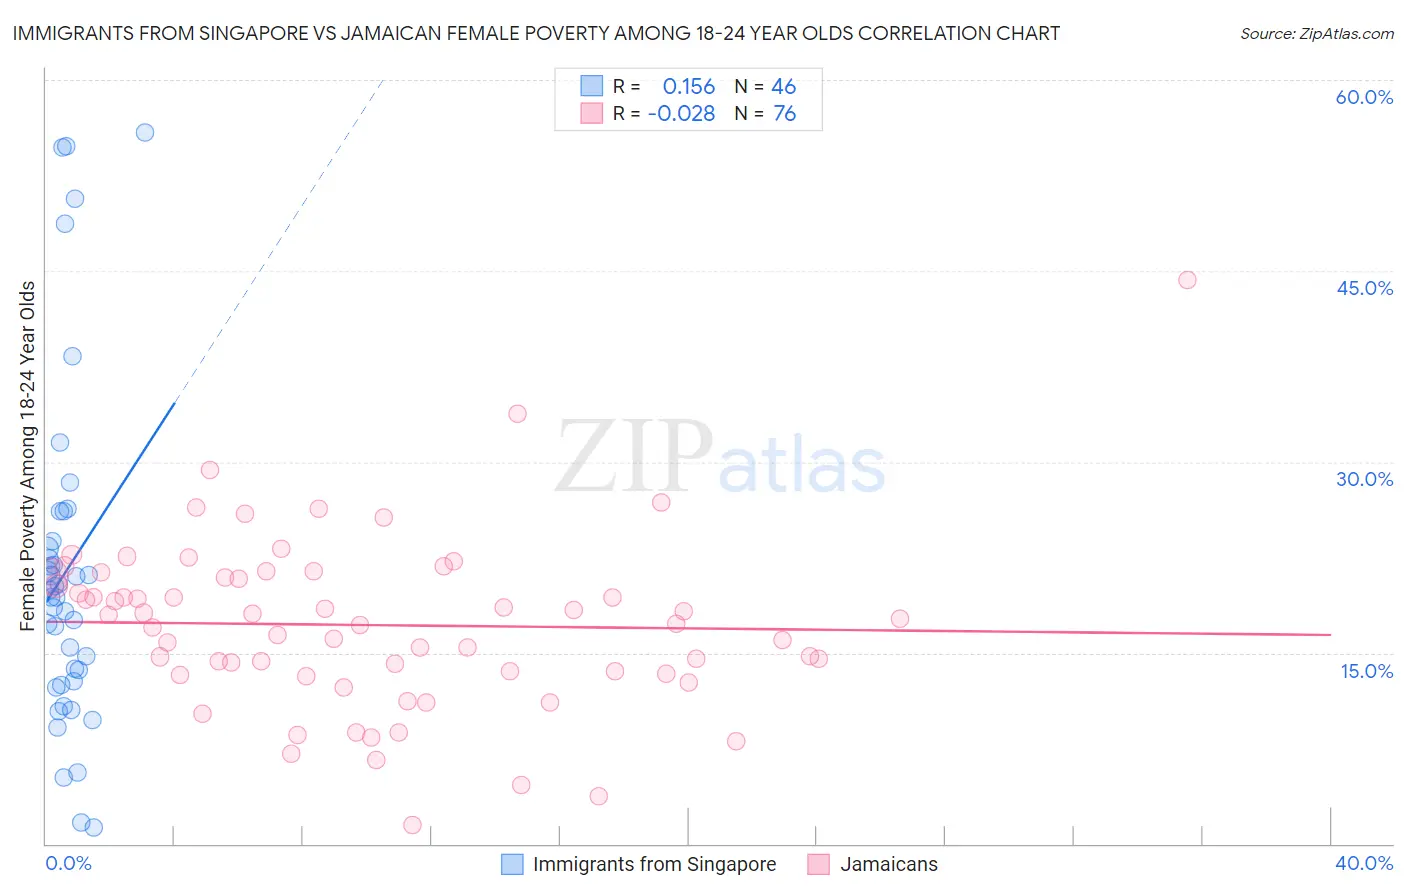 Immigrants from Singapore vs Jamaican Female Poverty Among 18-24 Year Olds